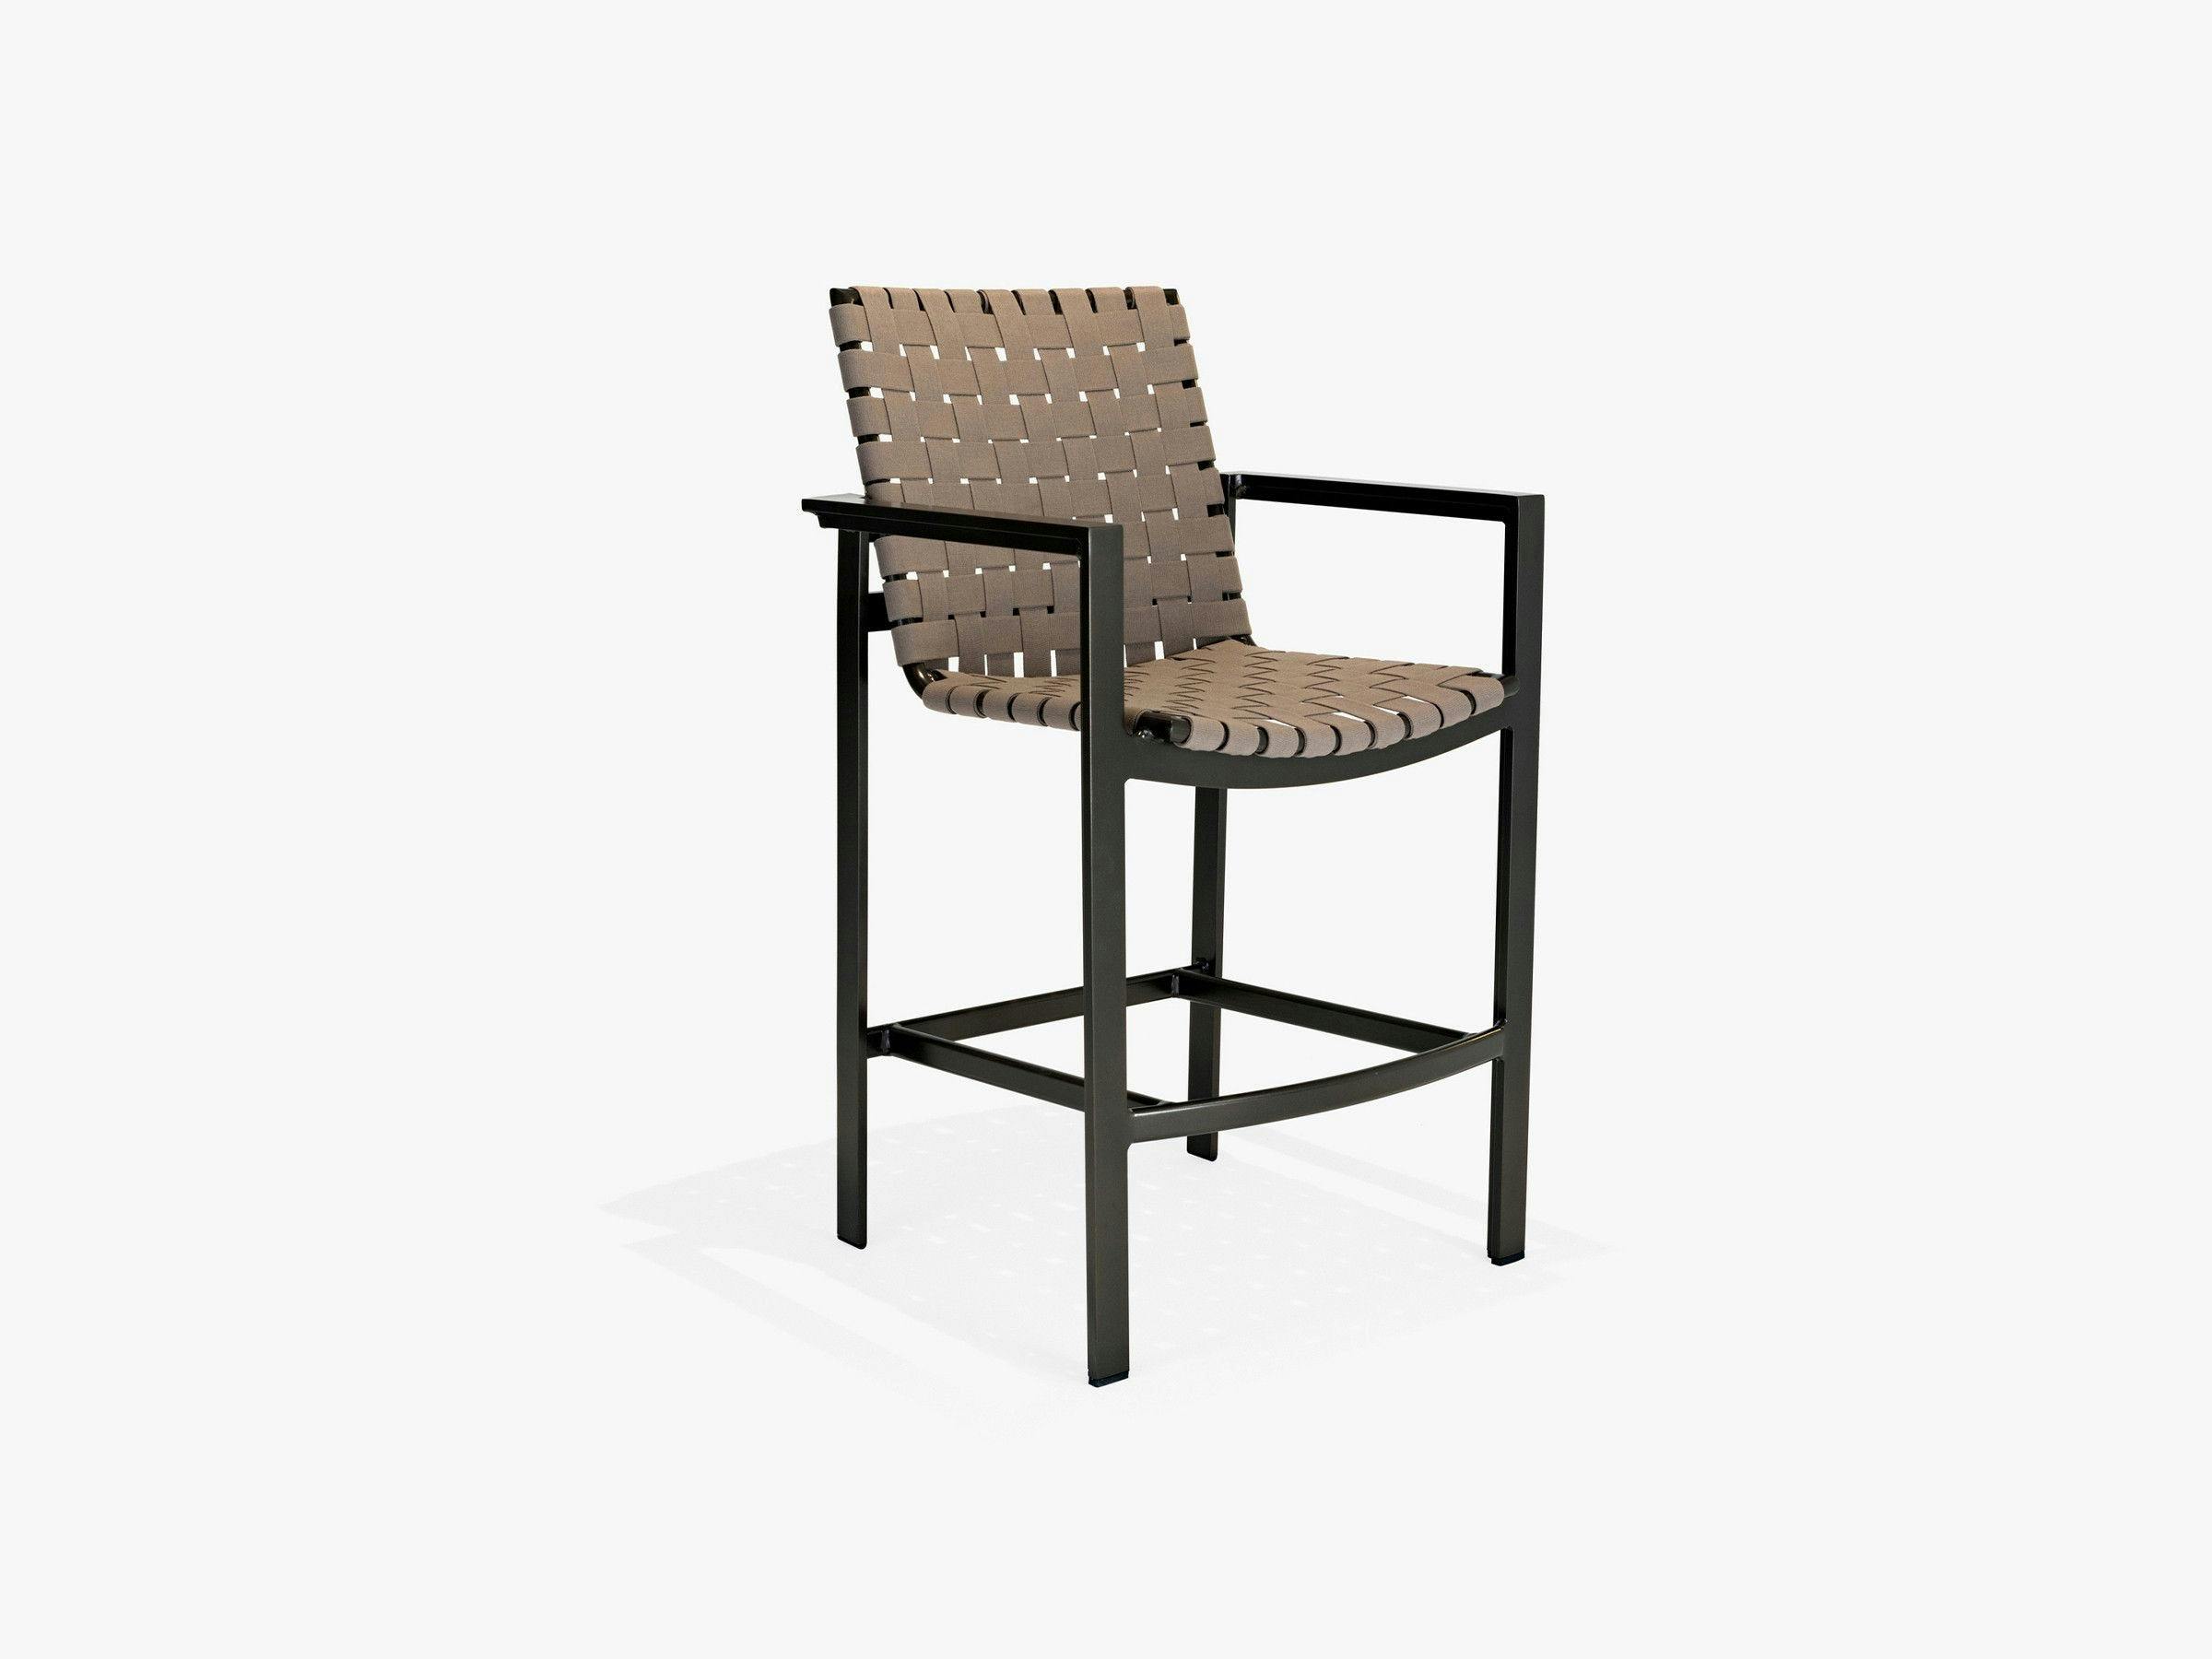 Meza Nesting Bar Stool with Arms, Suncloth Weave